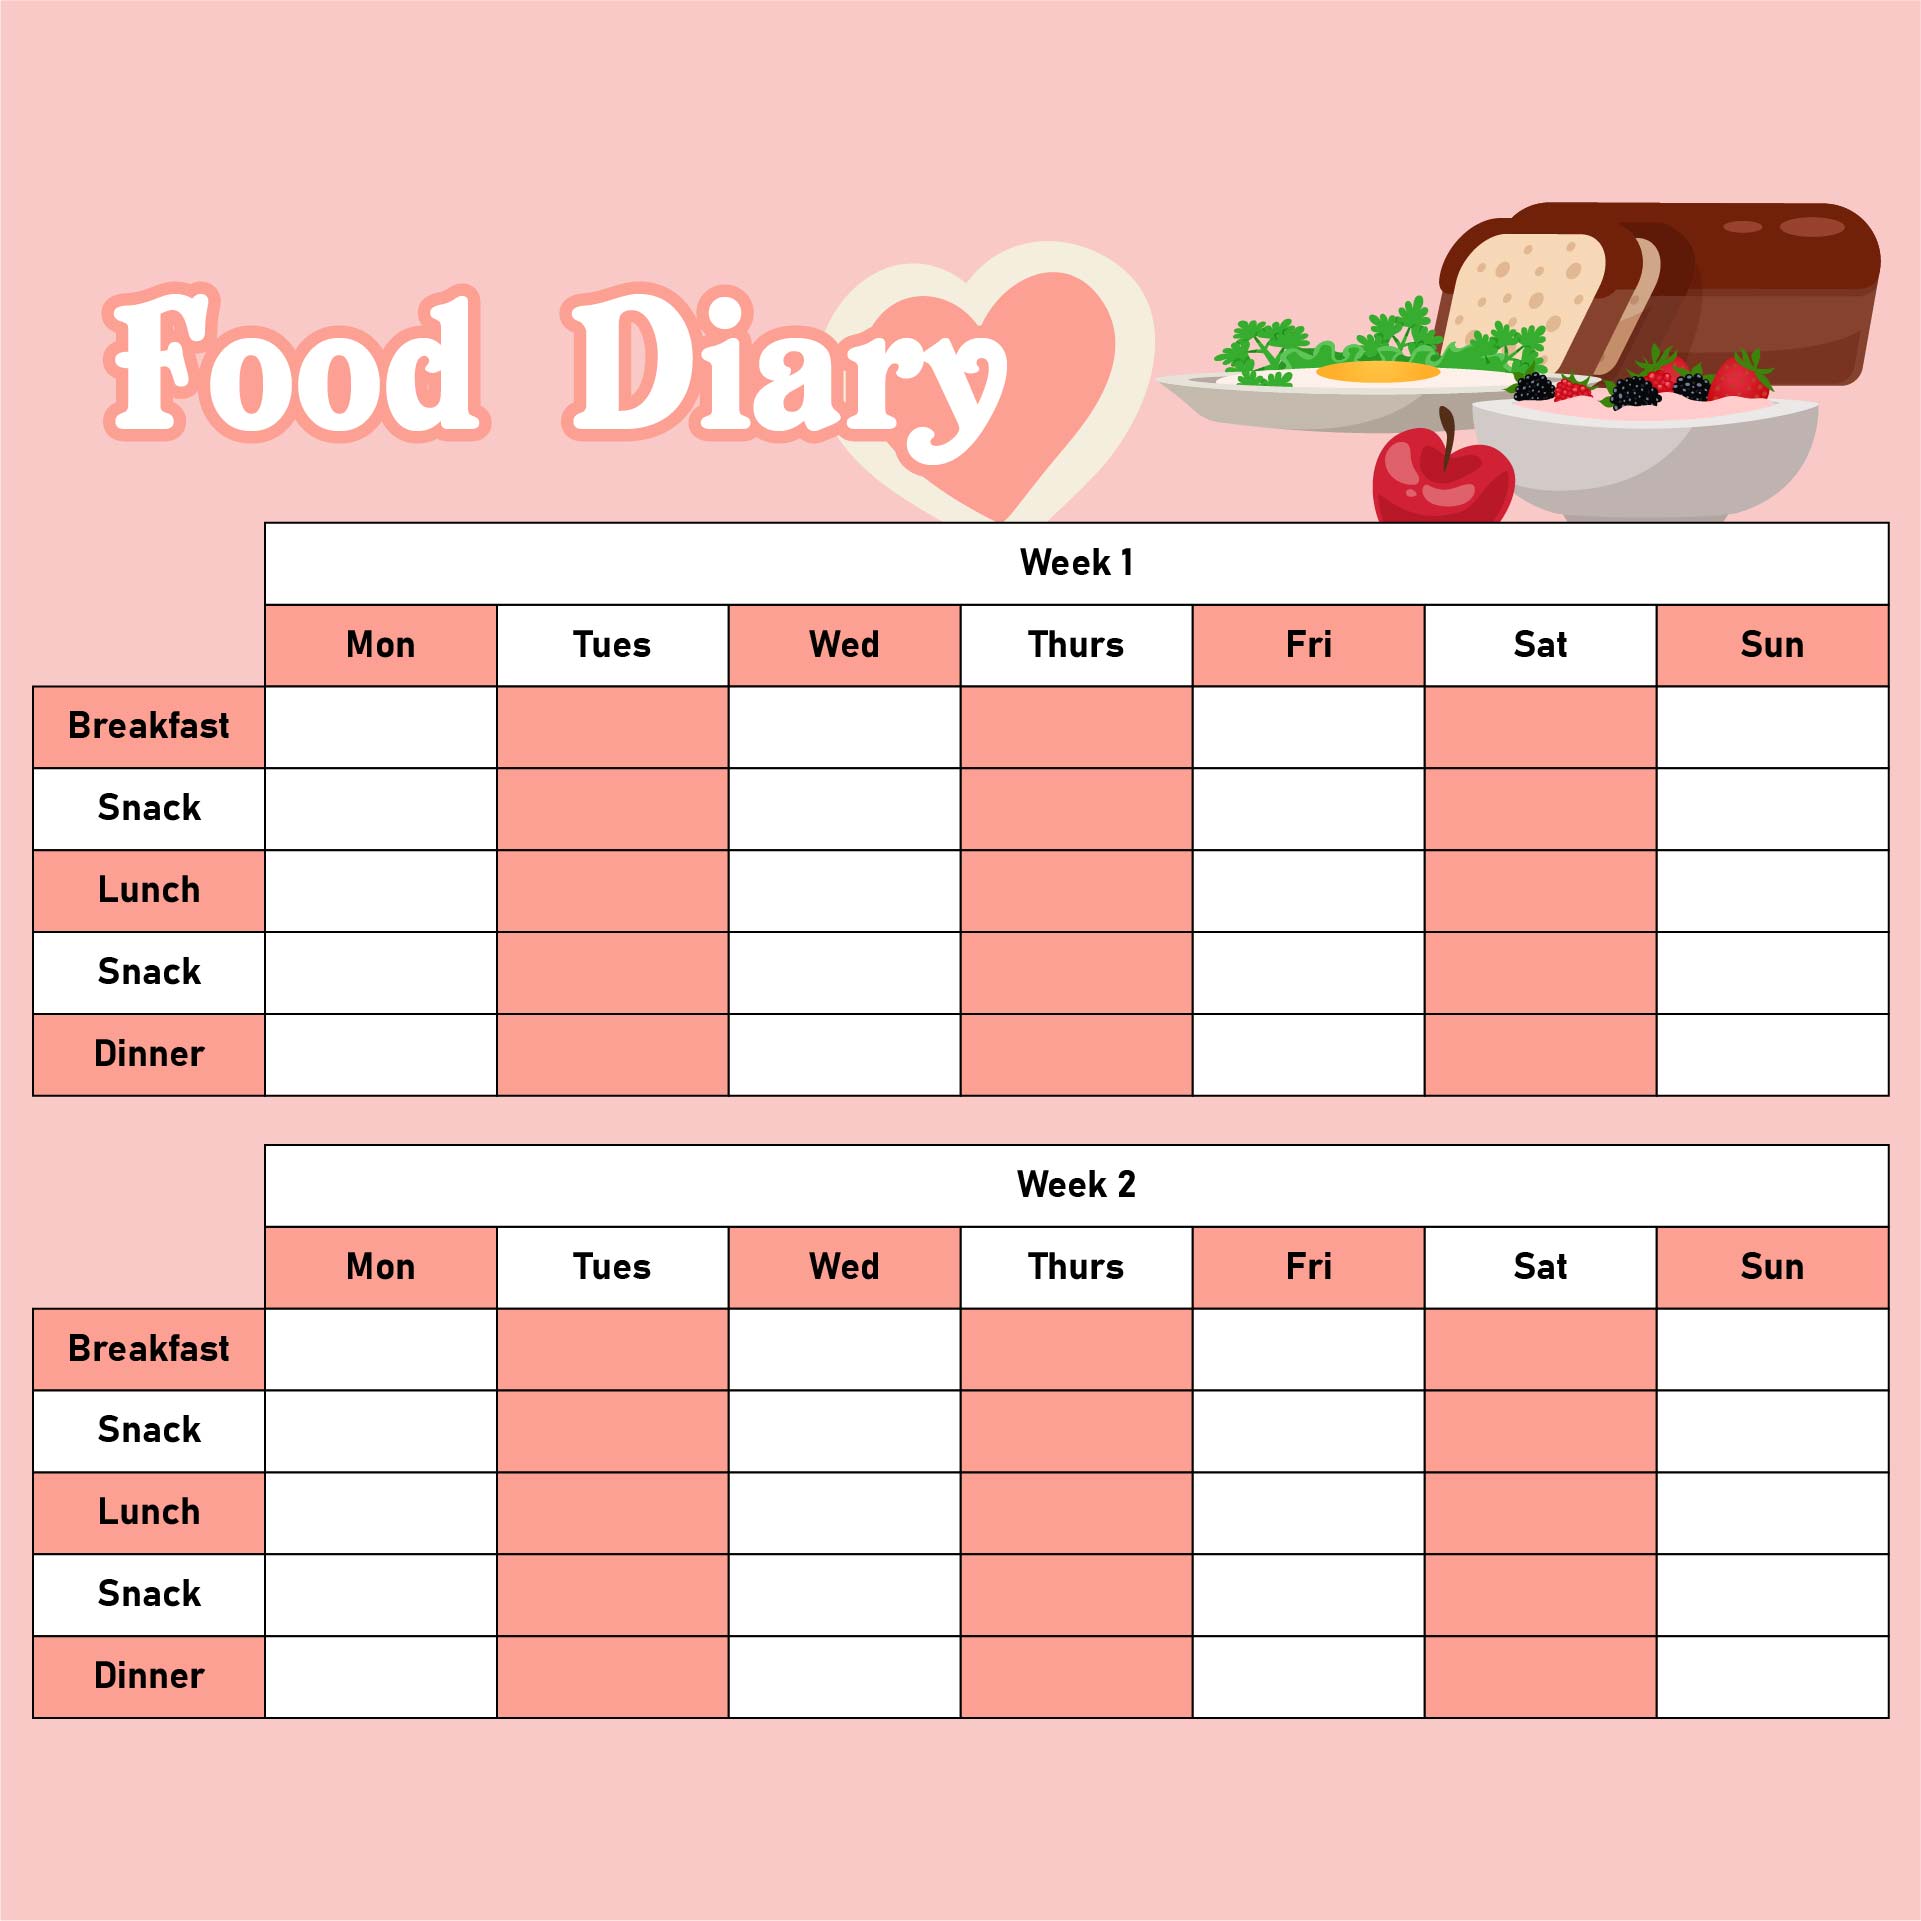 7-best-images-of-printable-7-day-food-log-5-meals-a-day-food-diary-diet-journal-printable